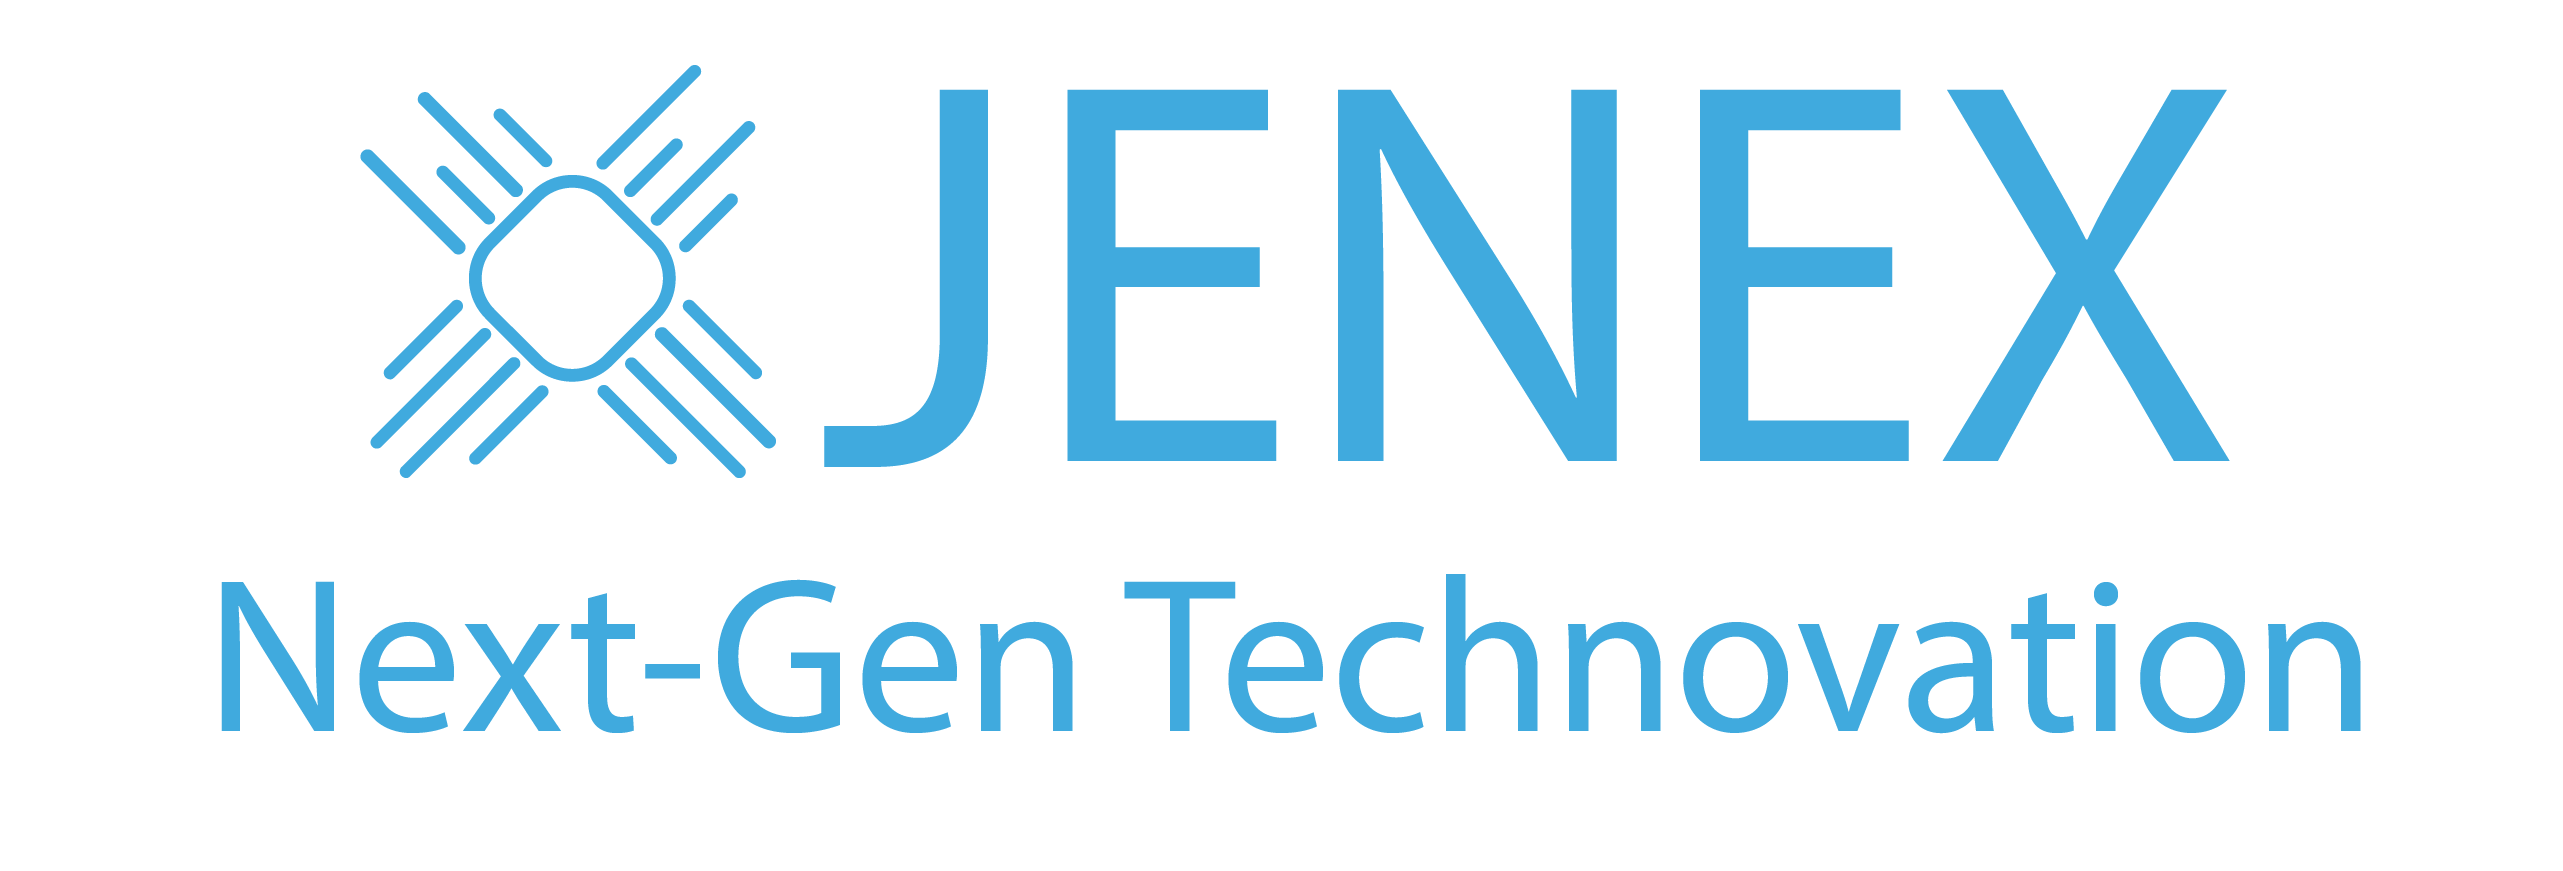 Jenex Technovation Pvt. Ltd. | Embedded Product Engineering and Services